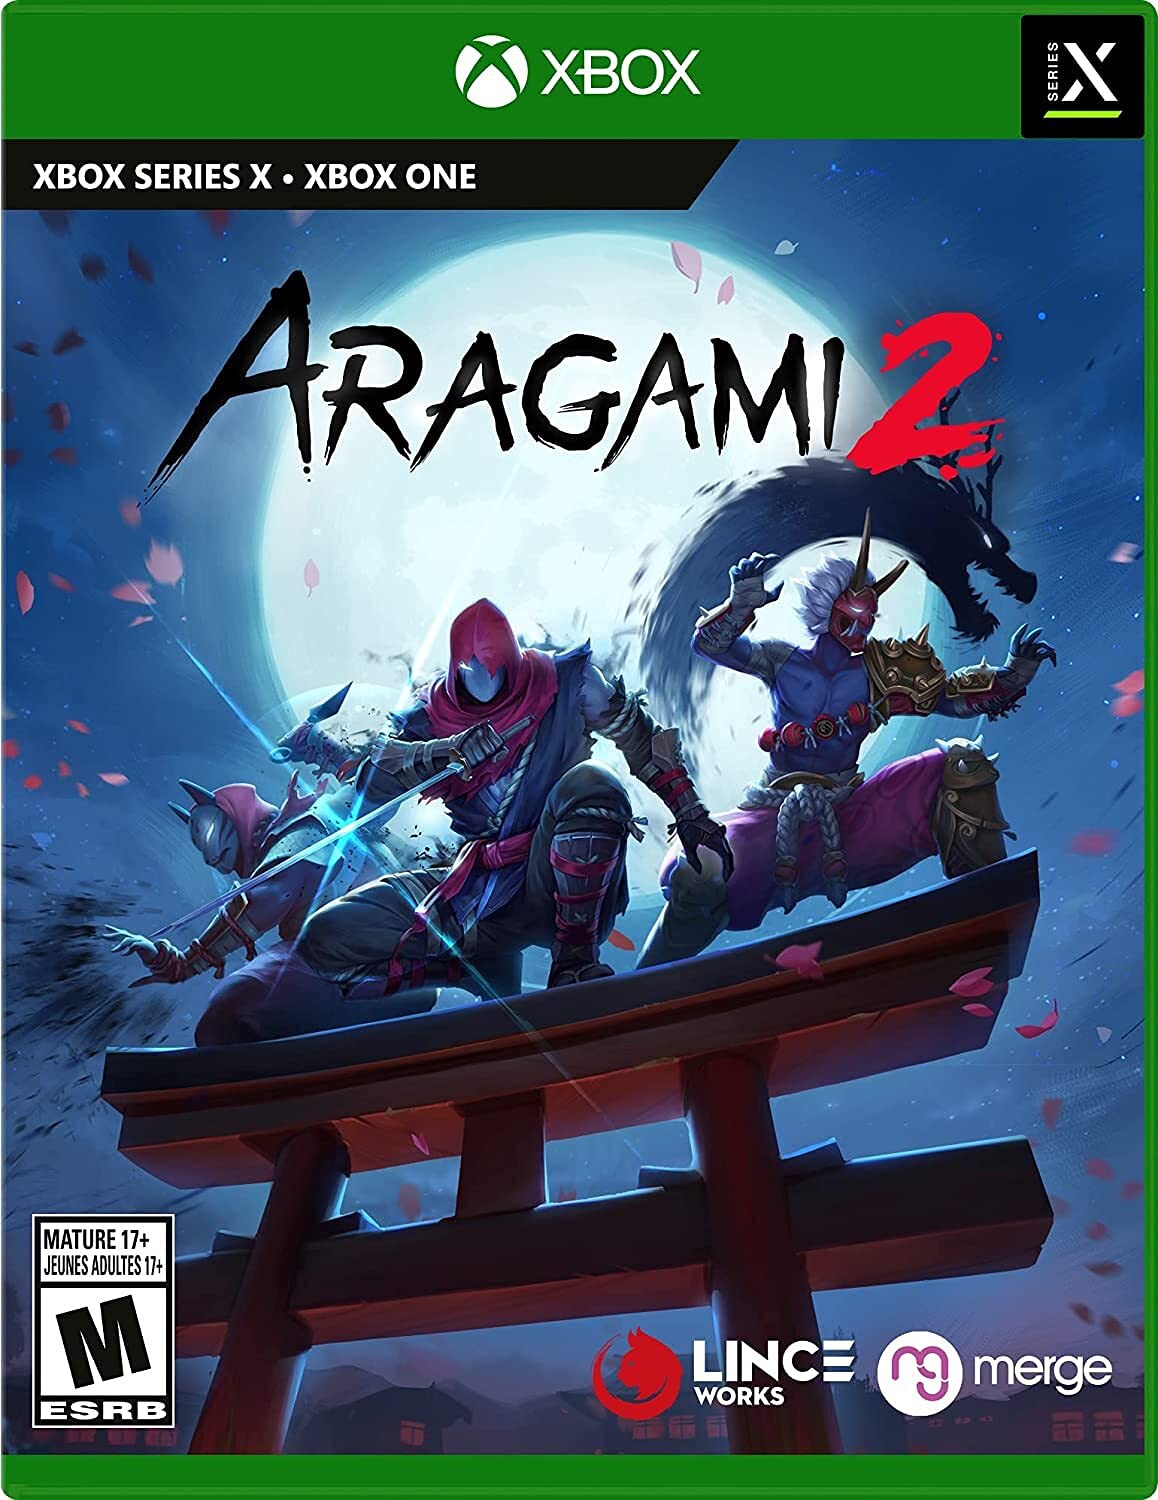 Aragami 2 - (XSX) Xbox Series X [UNBOXING] Video Games Merge Games   